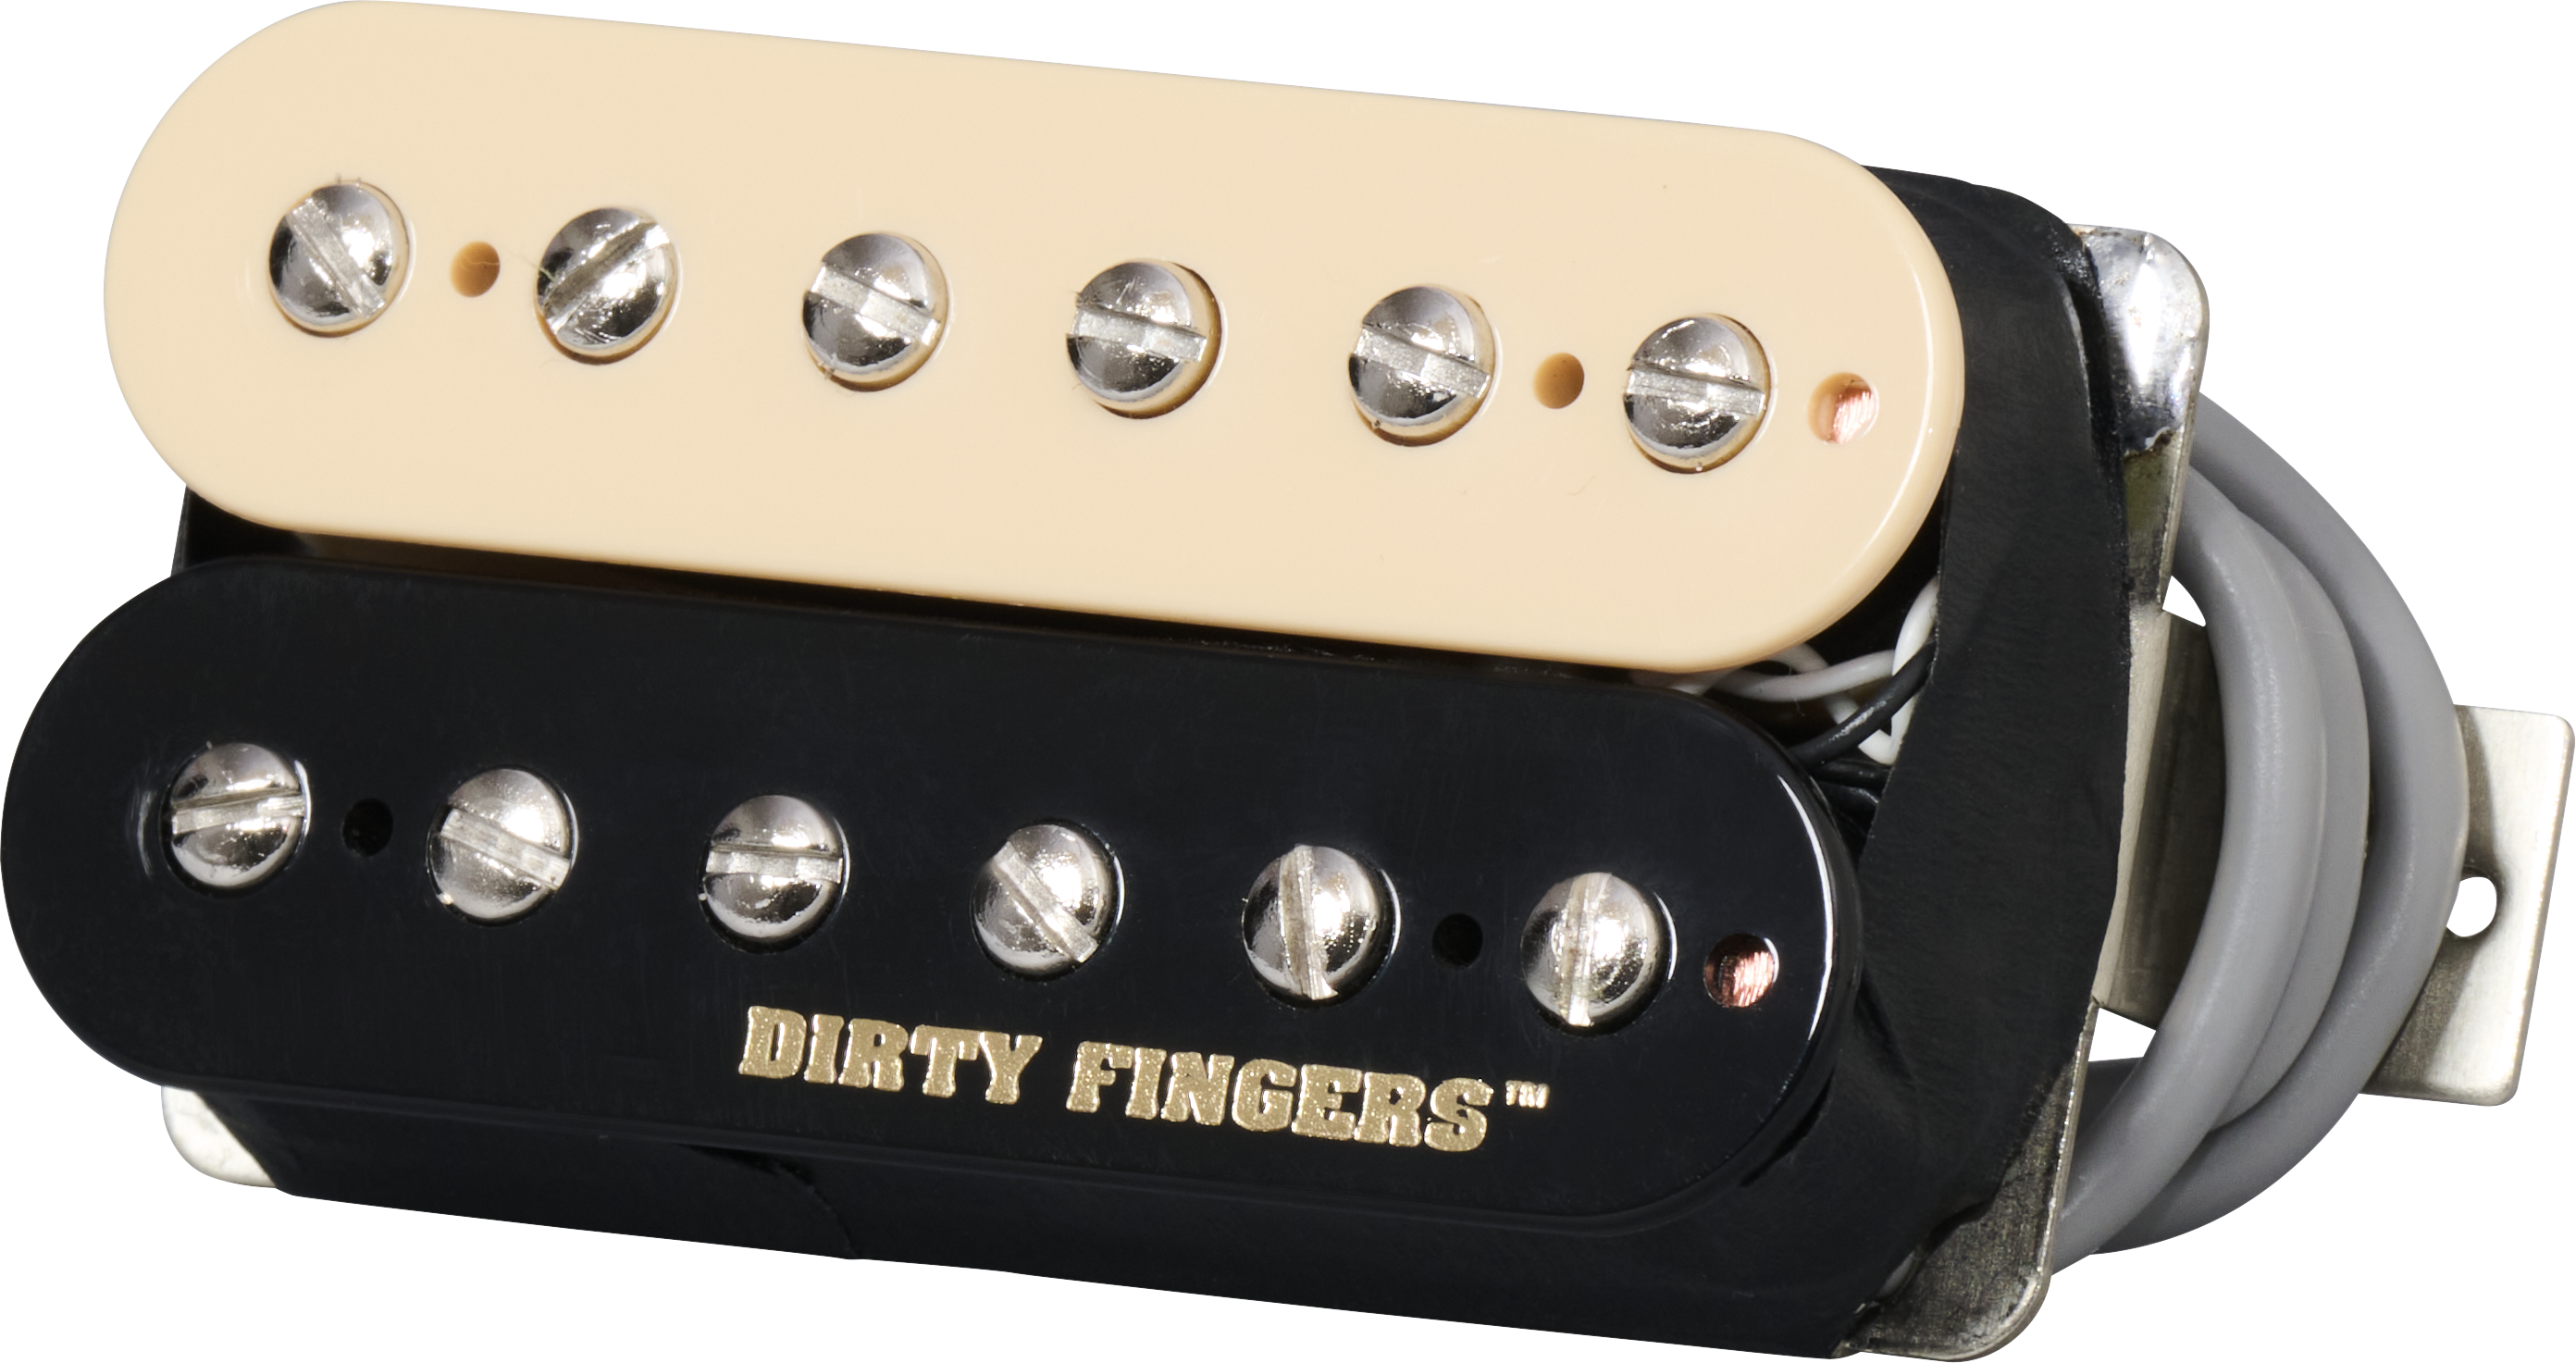 Gibson Dirty Fingers　Double Black　ケース入りホビー・楽器・アート